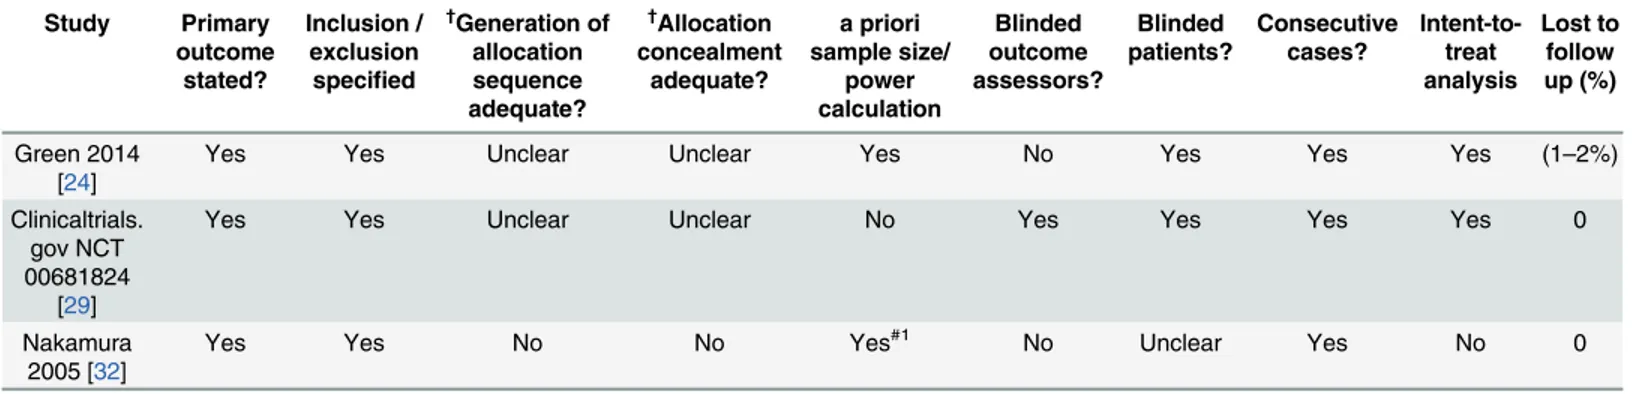 Table 6. Appraisal of Study Quality for Three Randomized Controlled Trials *. Study Primary outcome stated? Inclusion /exclusionspeci ﬁed † Generation ofallocationsequence adequate? † Allocation concealmentadequate? a priori sample size/powercalculation Bl